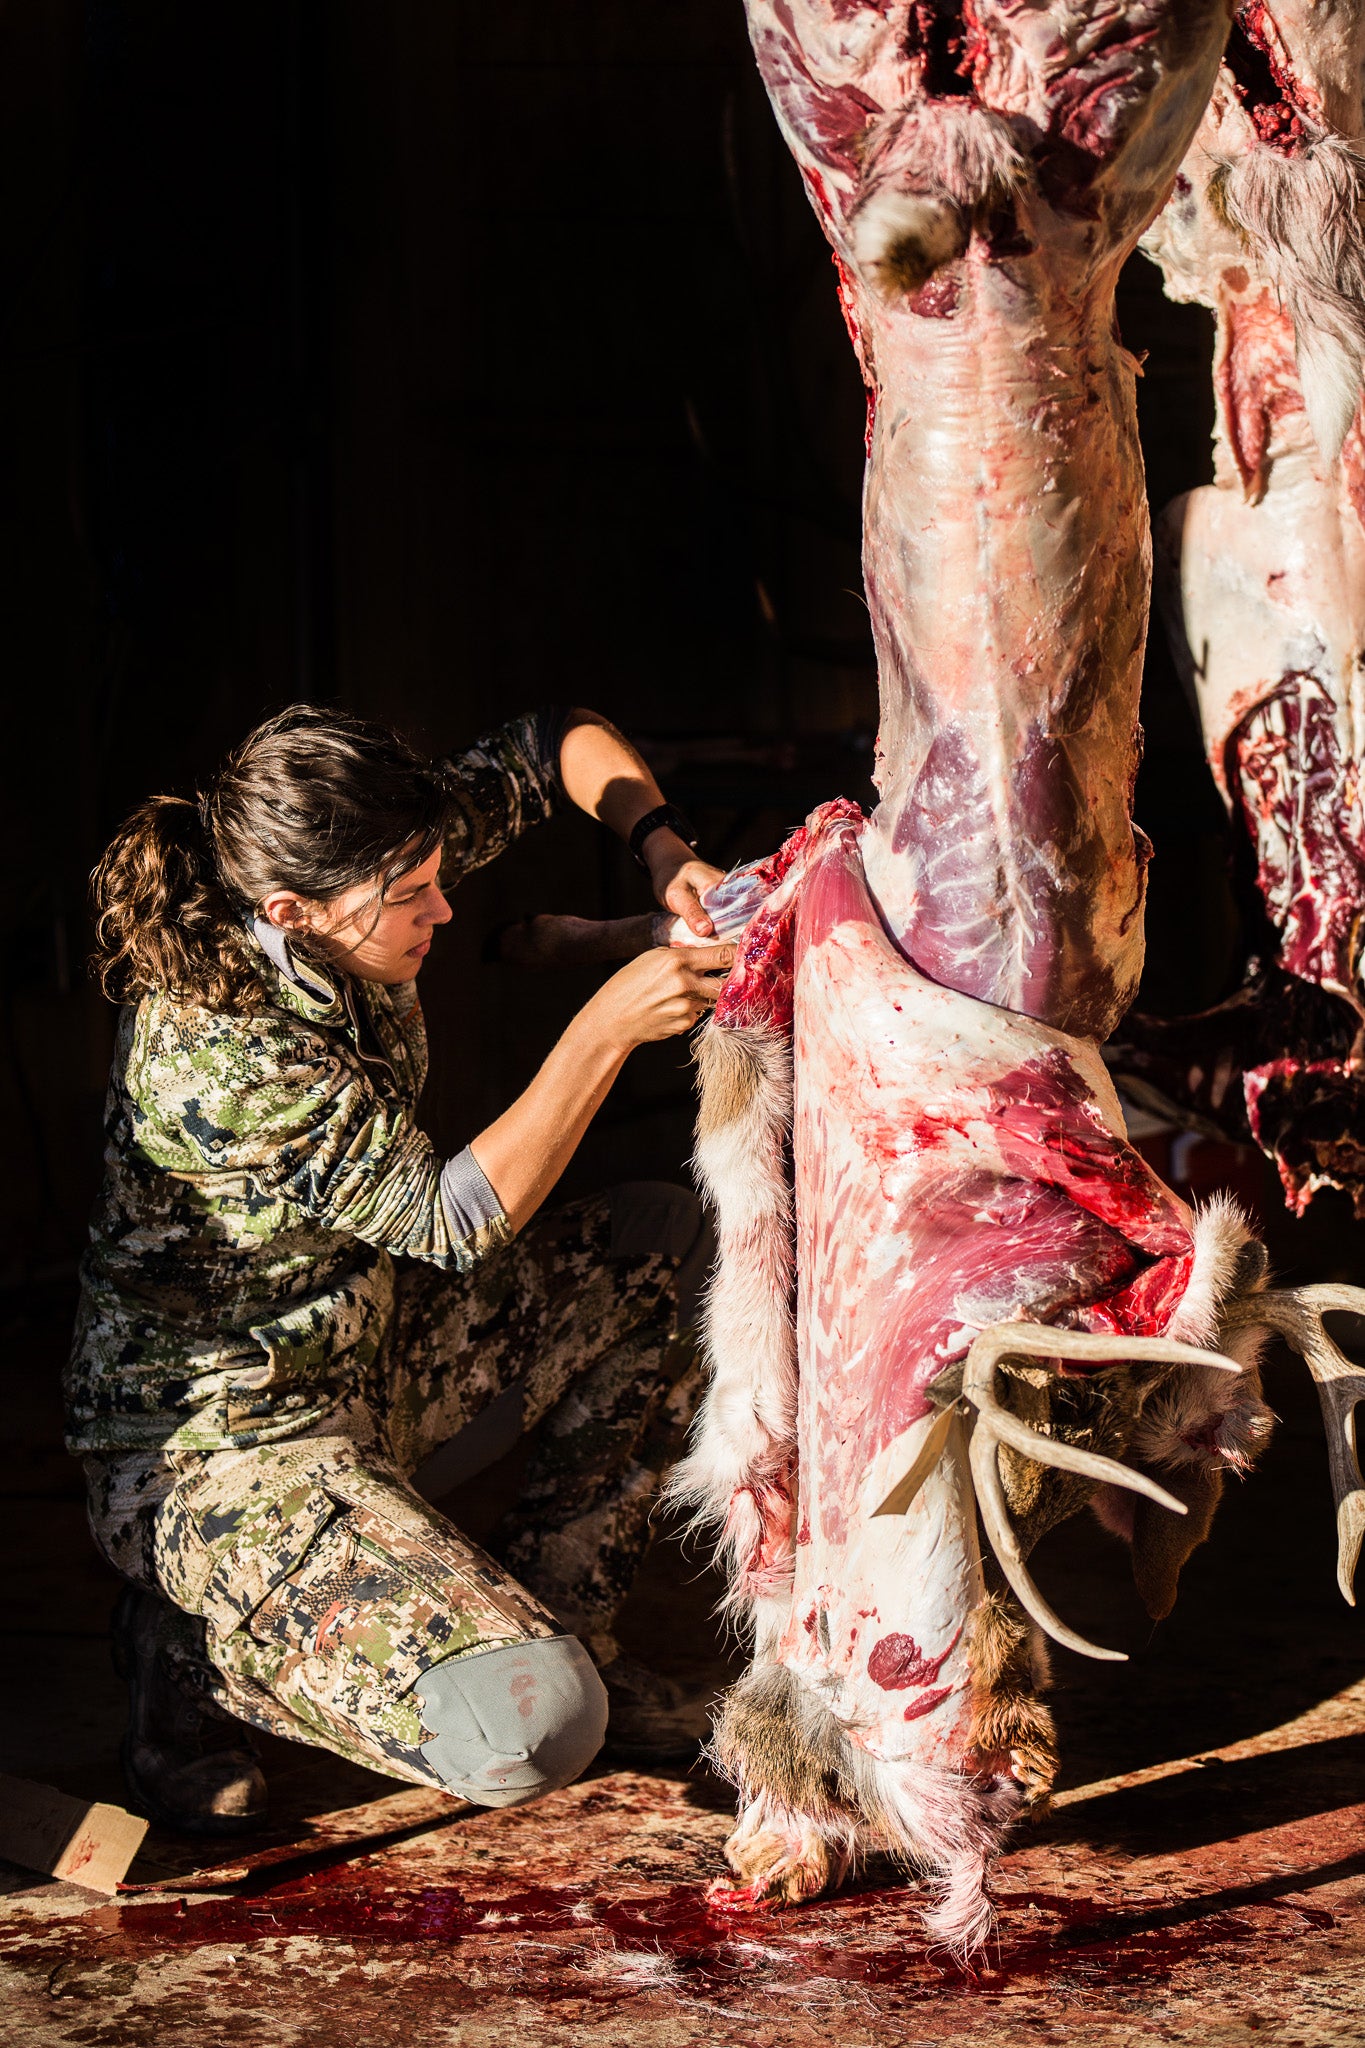 Skinning a deer in a skinning shed.